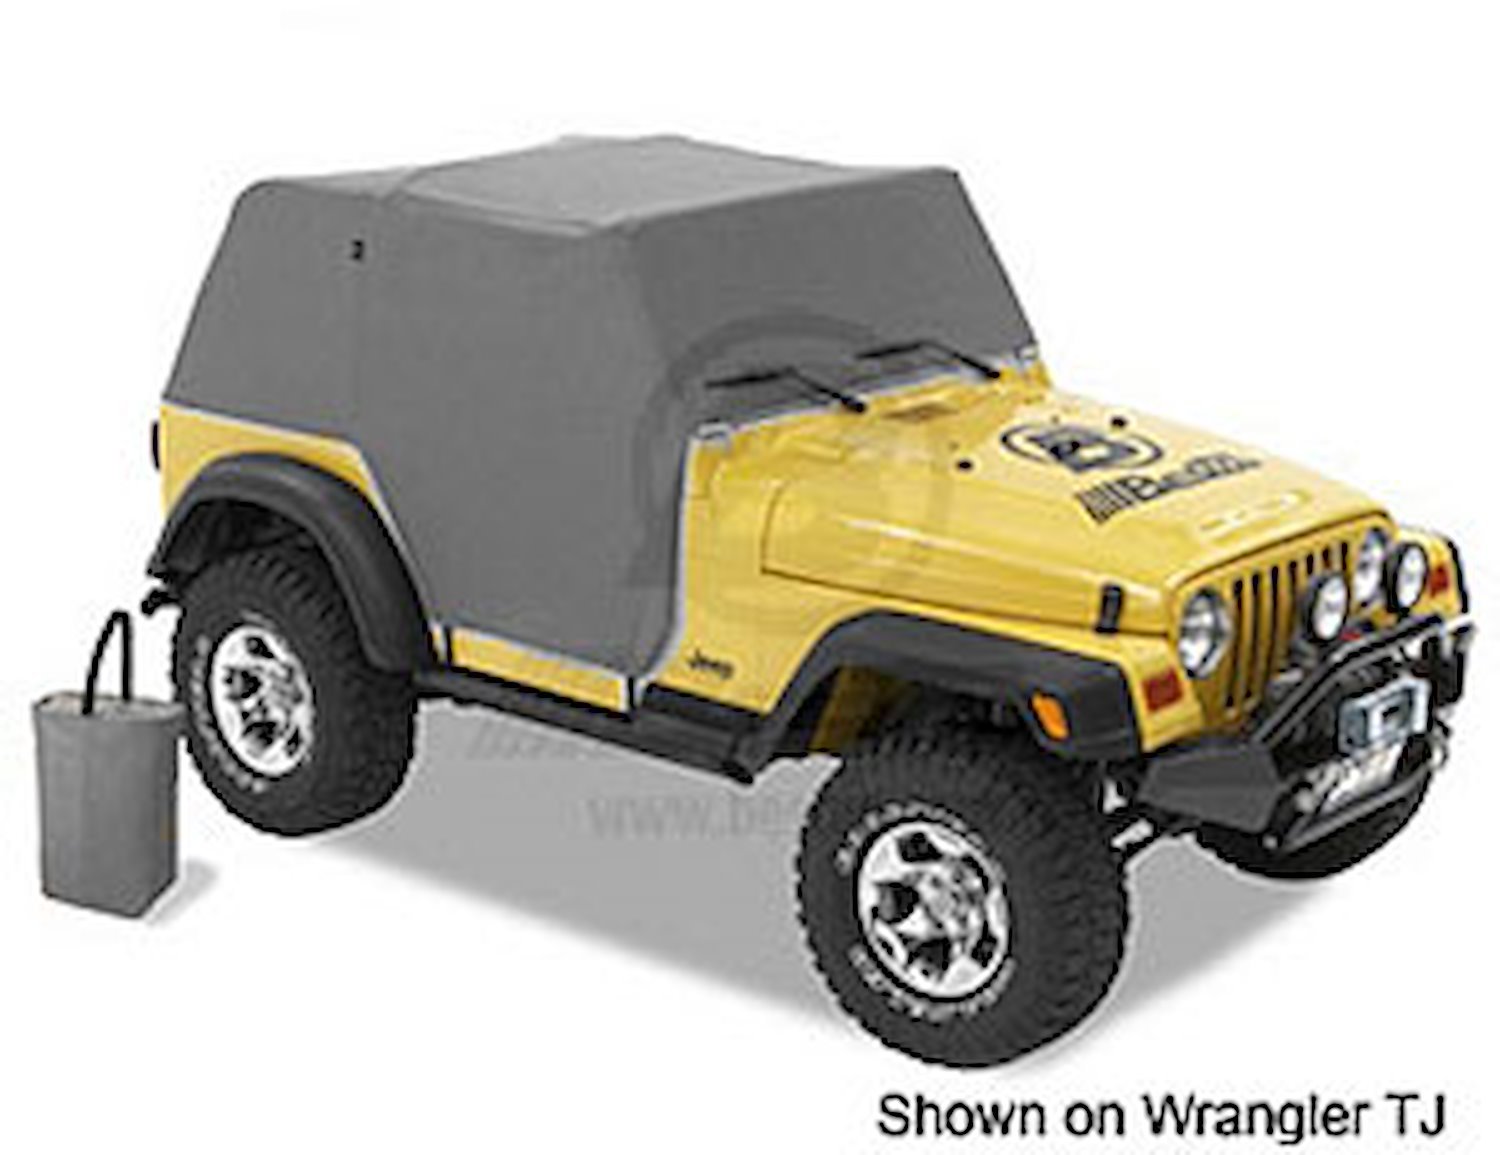 All Weather Trail Cover For Jeep, Charcoal, Incl. Stuff Sack For Storage,